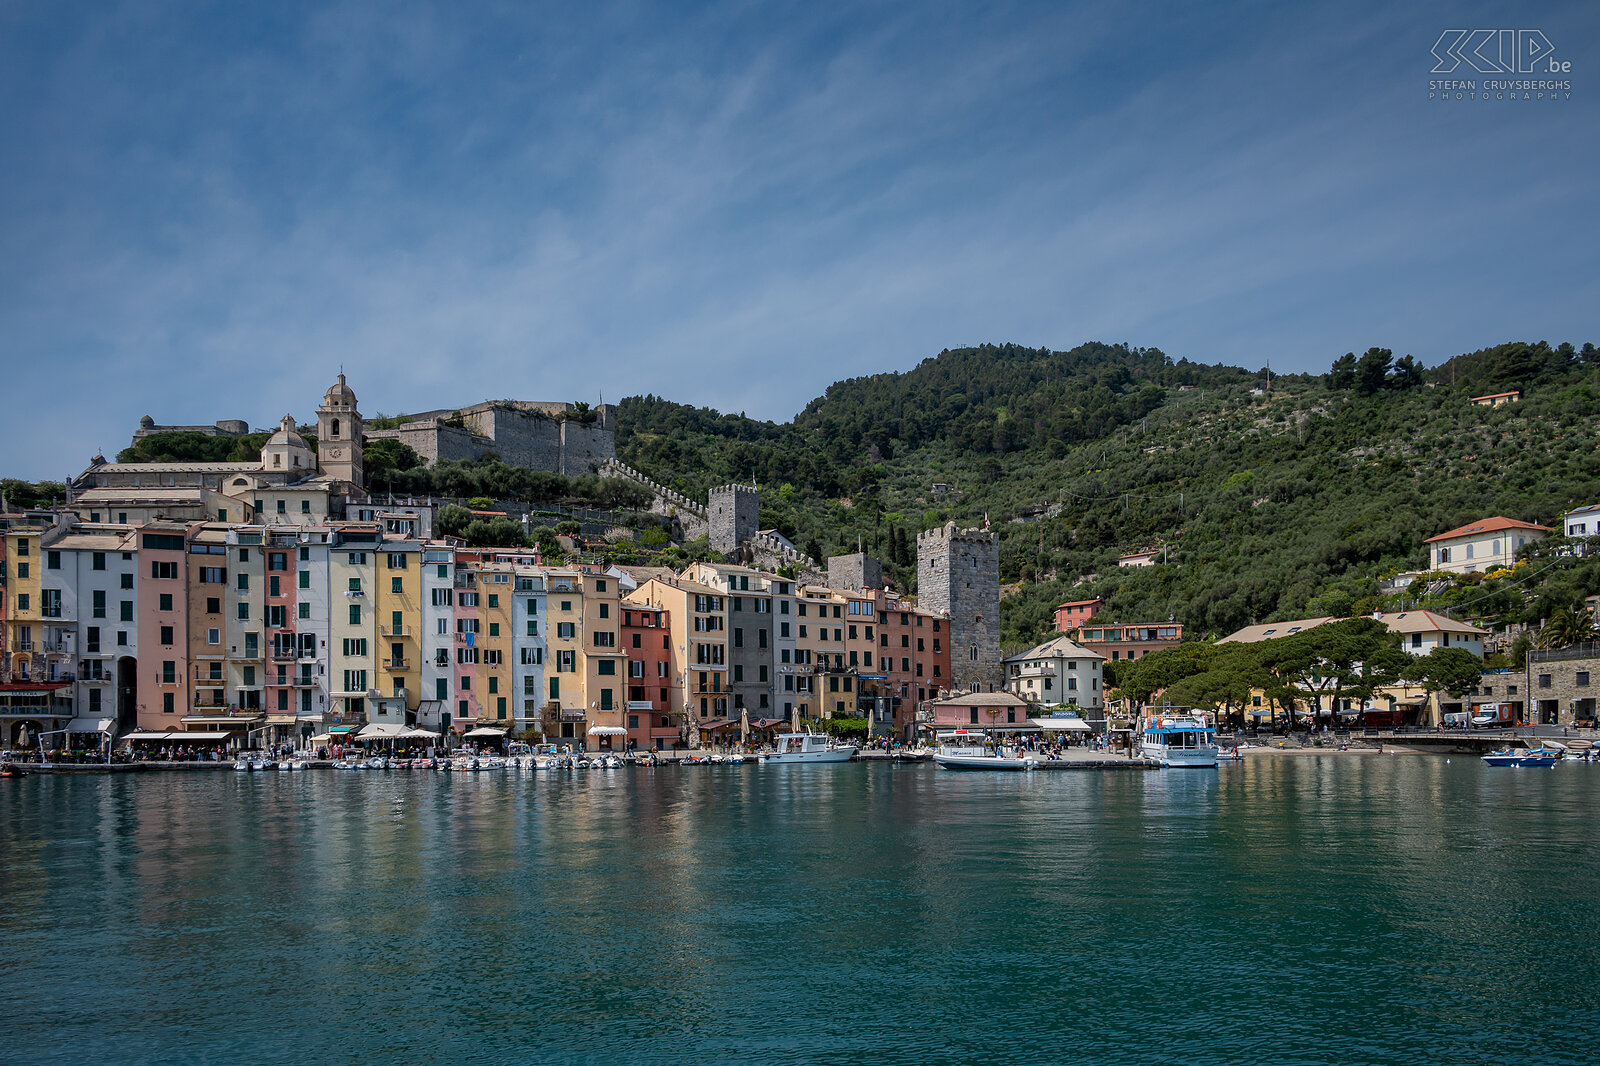 Portovenere We traveled by boat from Vernazza to Portovenere. The impressive citadel, the church on the rock, the narrow streets, the colored houses and the authentic harbor make this town one of the most romantic places on the Ligurian coast and actually also the hidden sixth pearl of the Cinque Terre. Stefan Cruysberghs